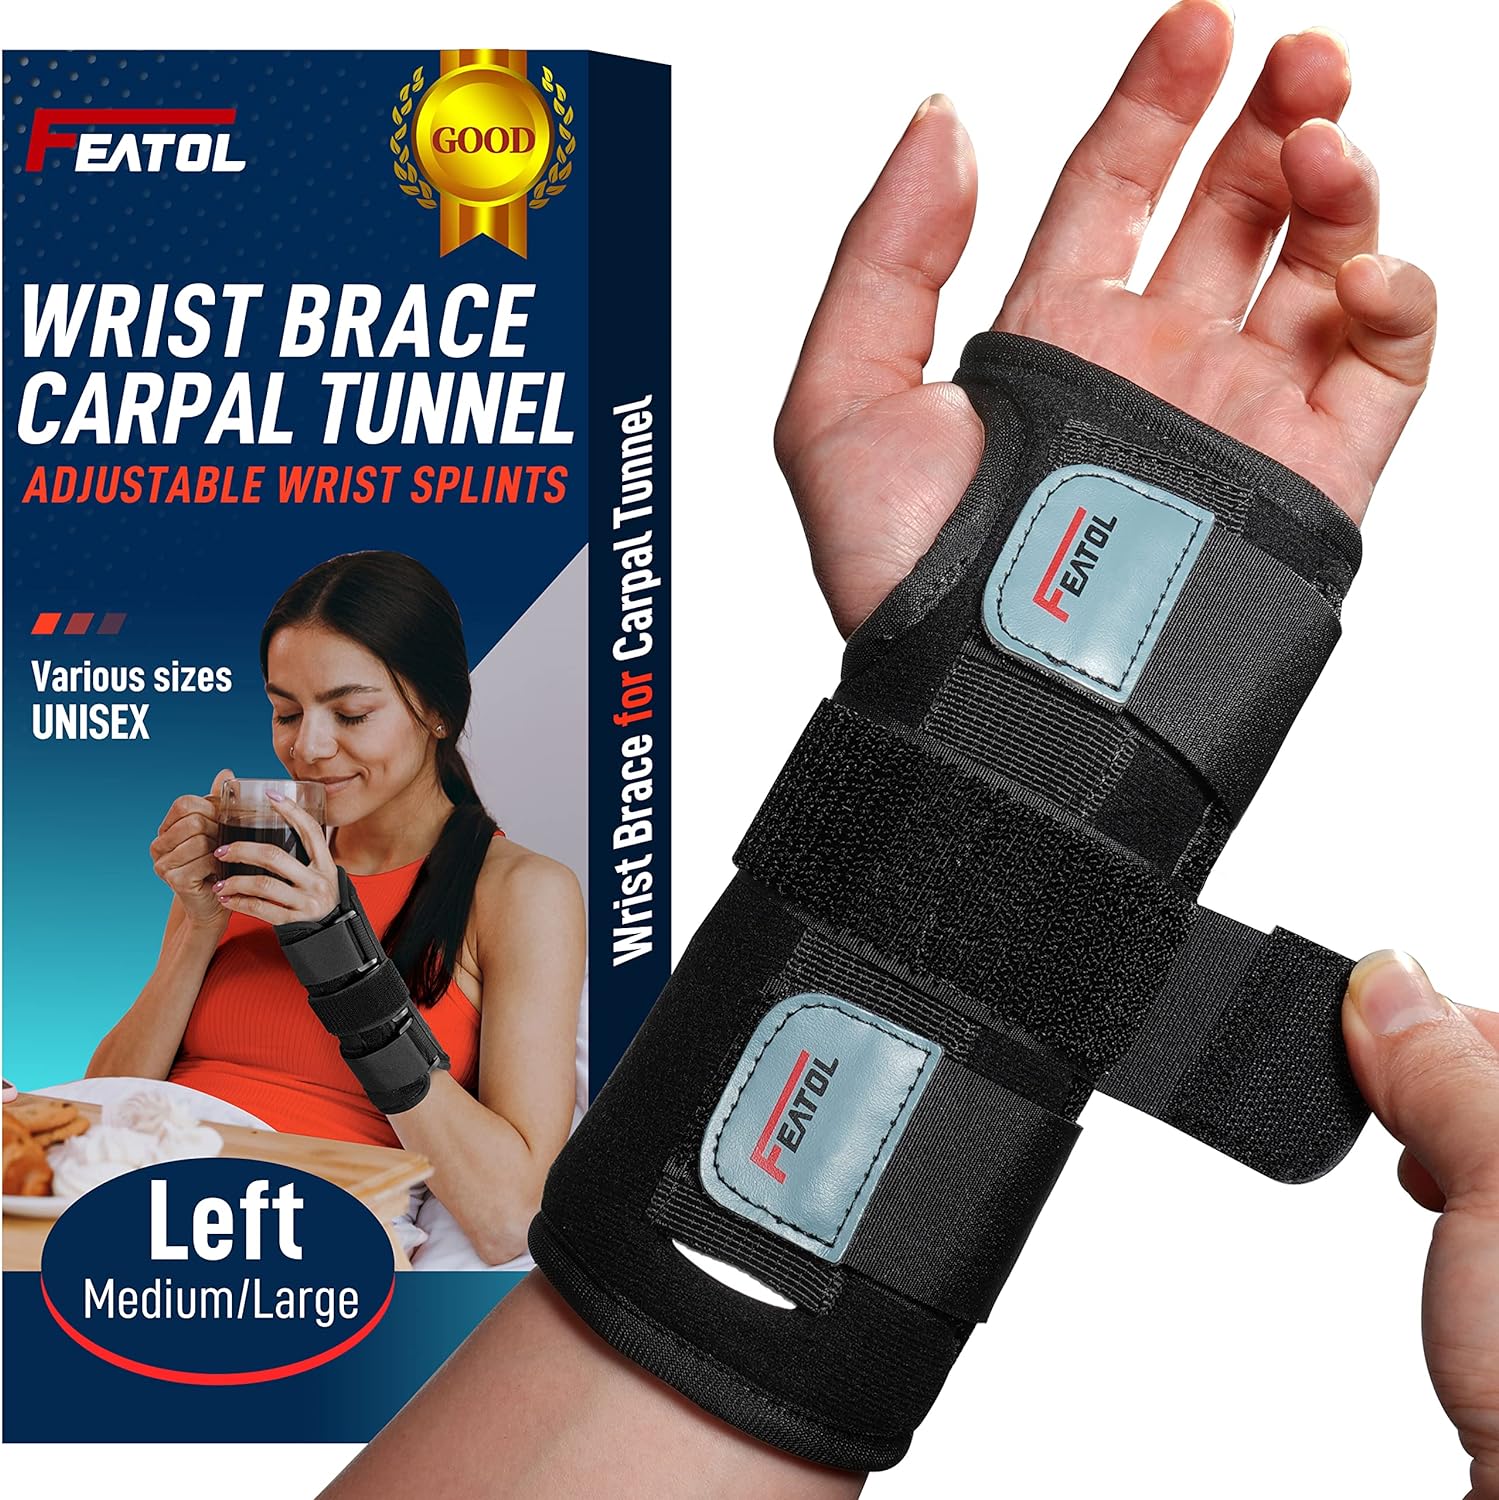 Adjustable Night Wrist Support Brace Review